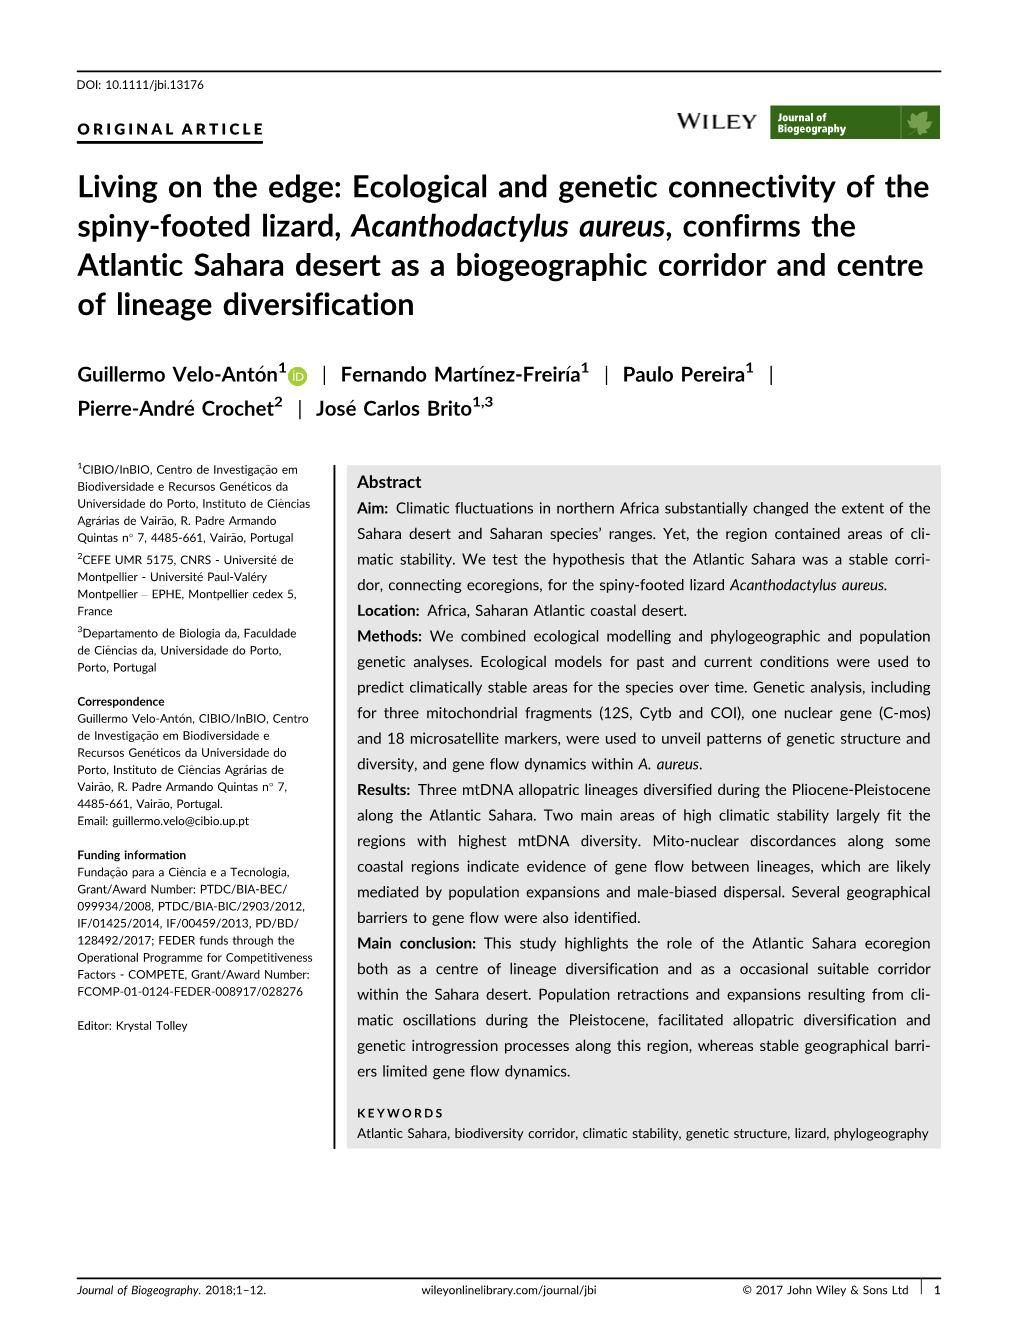 Ecological and Genetic Connectivity of the Spiny‐Footed Lizard